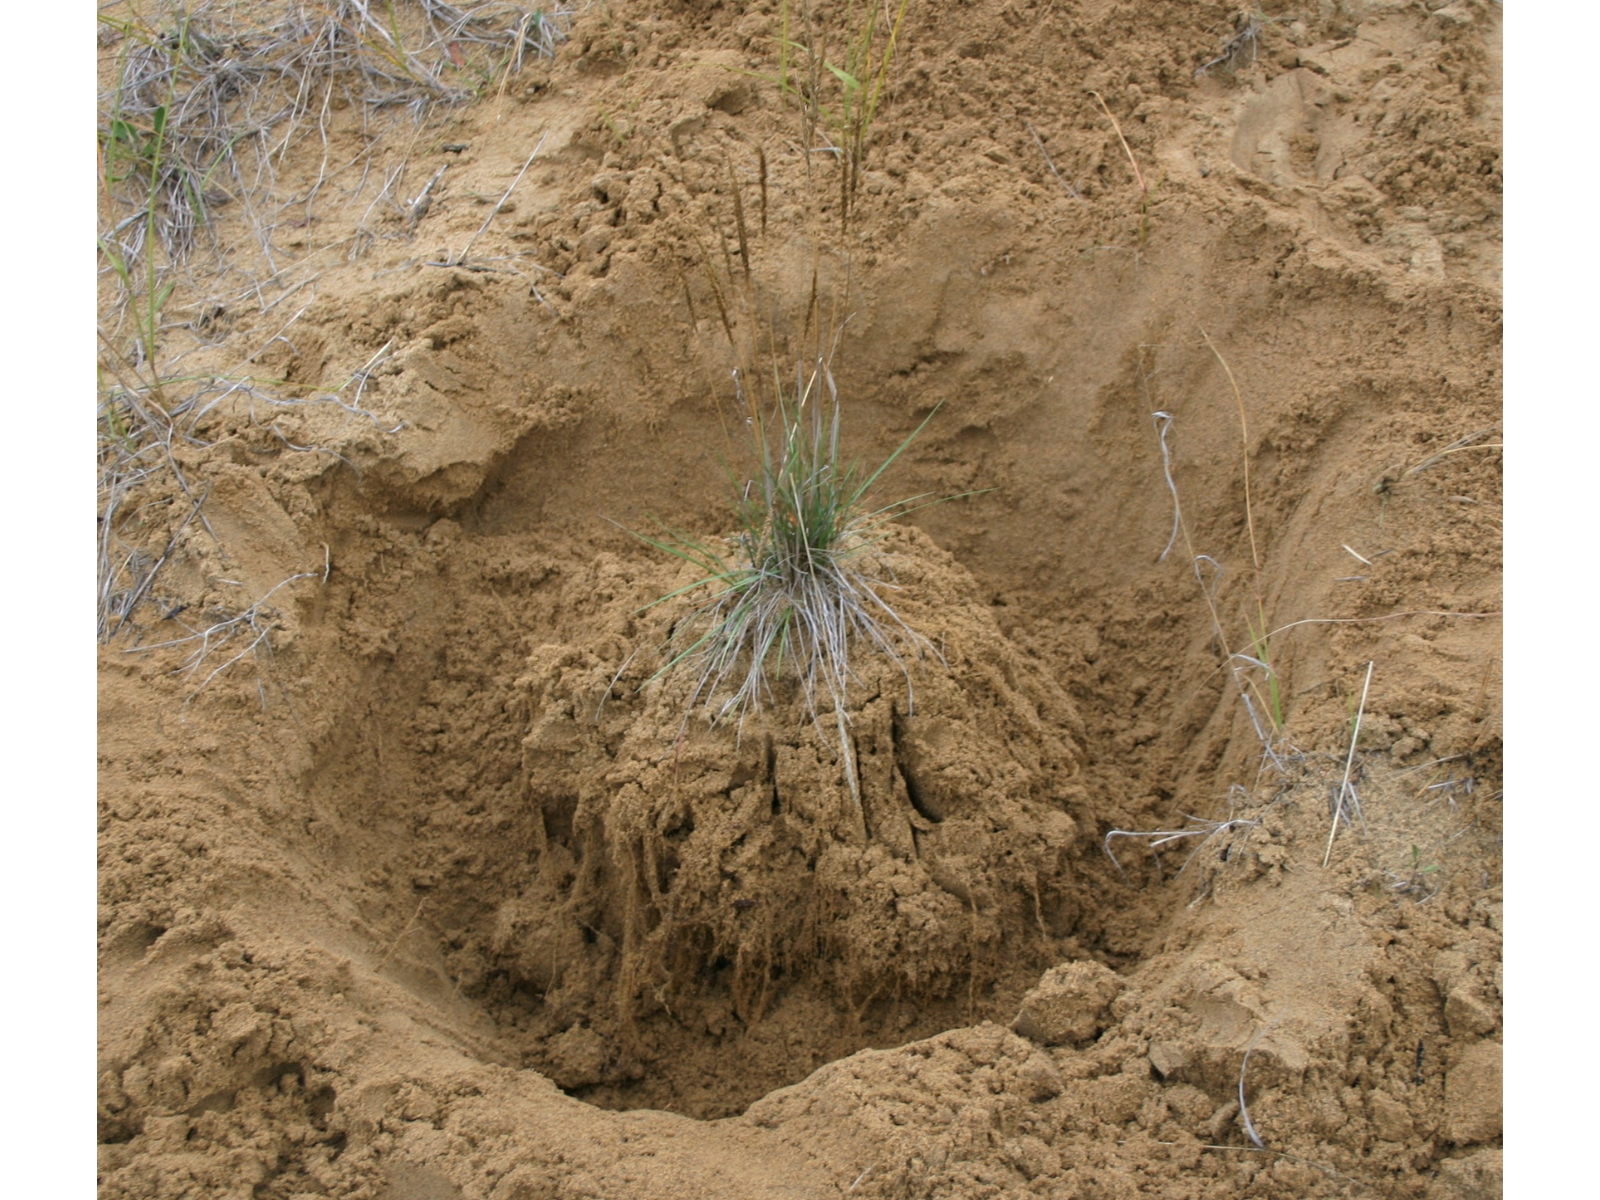 A partially excavated June Grass specimen, with a trough dug around the root system in sandy soil.